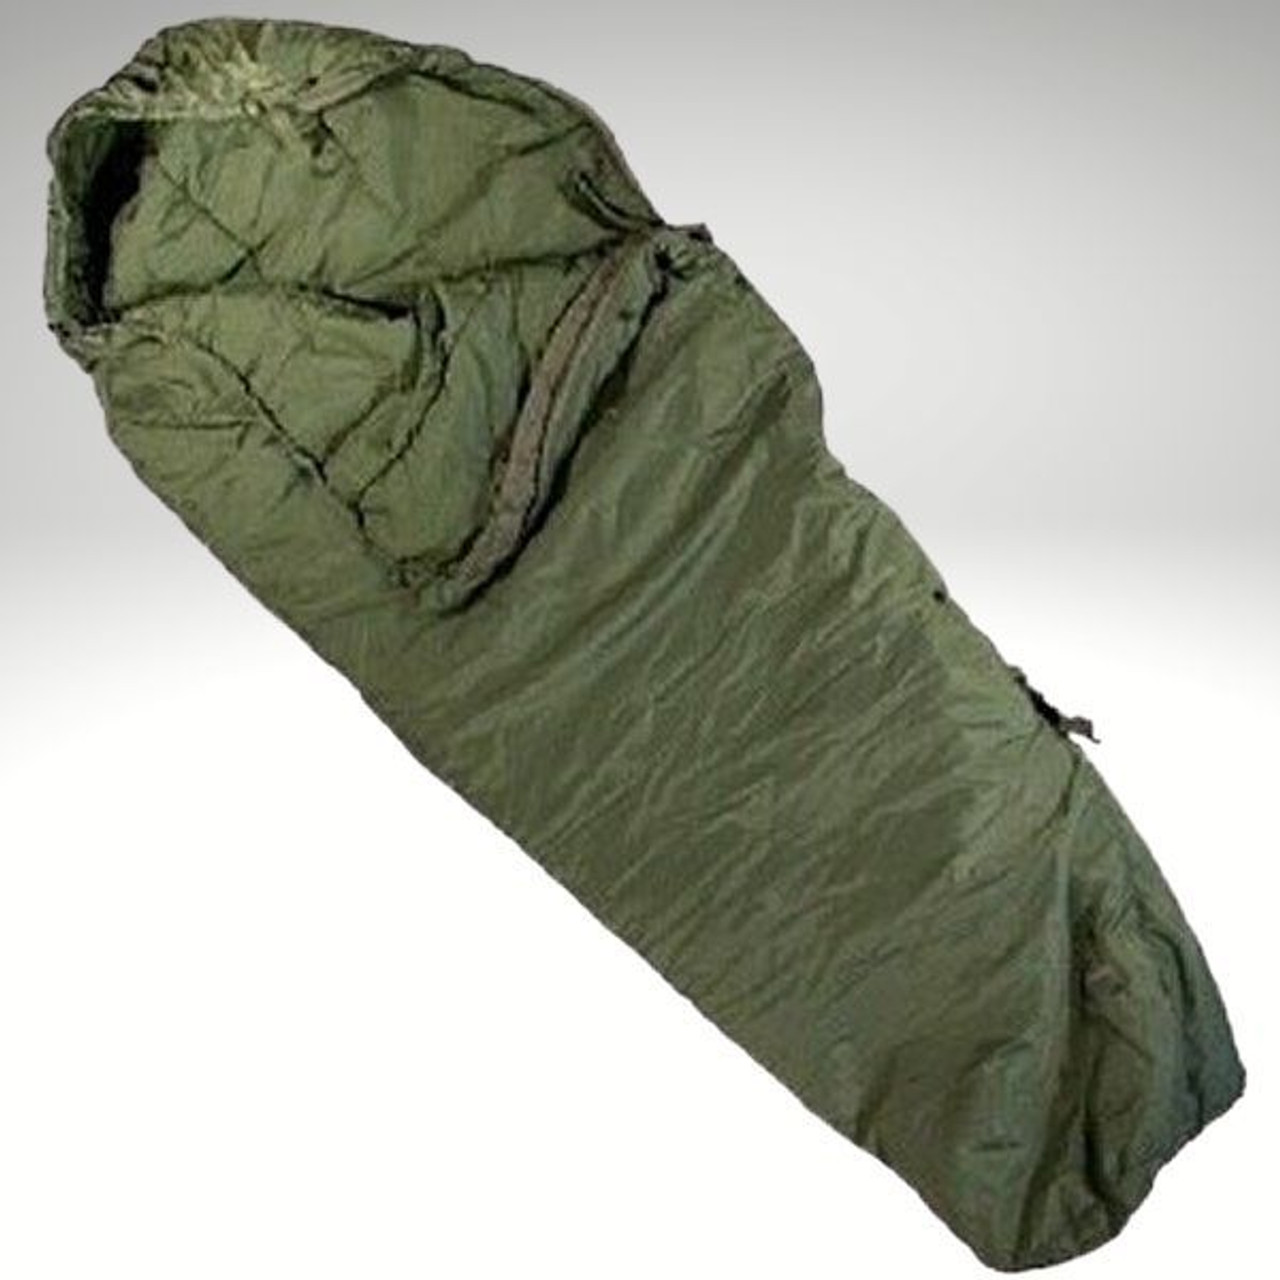 Army Sleeping Bag for Cold Weather  Mummy Shaped  Olive Green  Olive  Planet